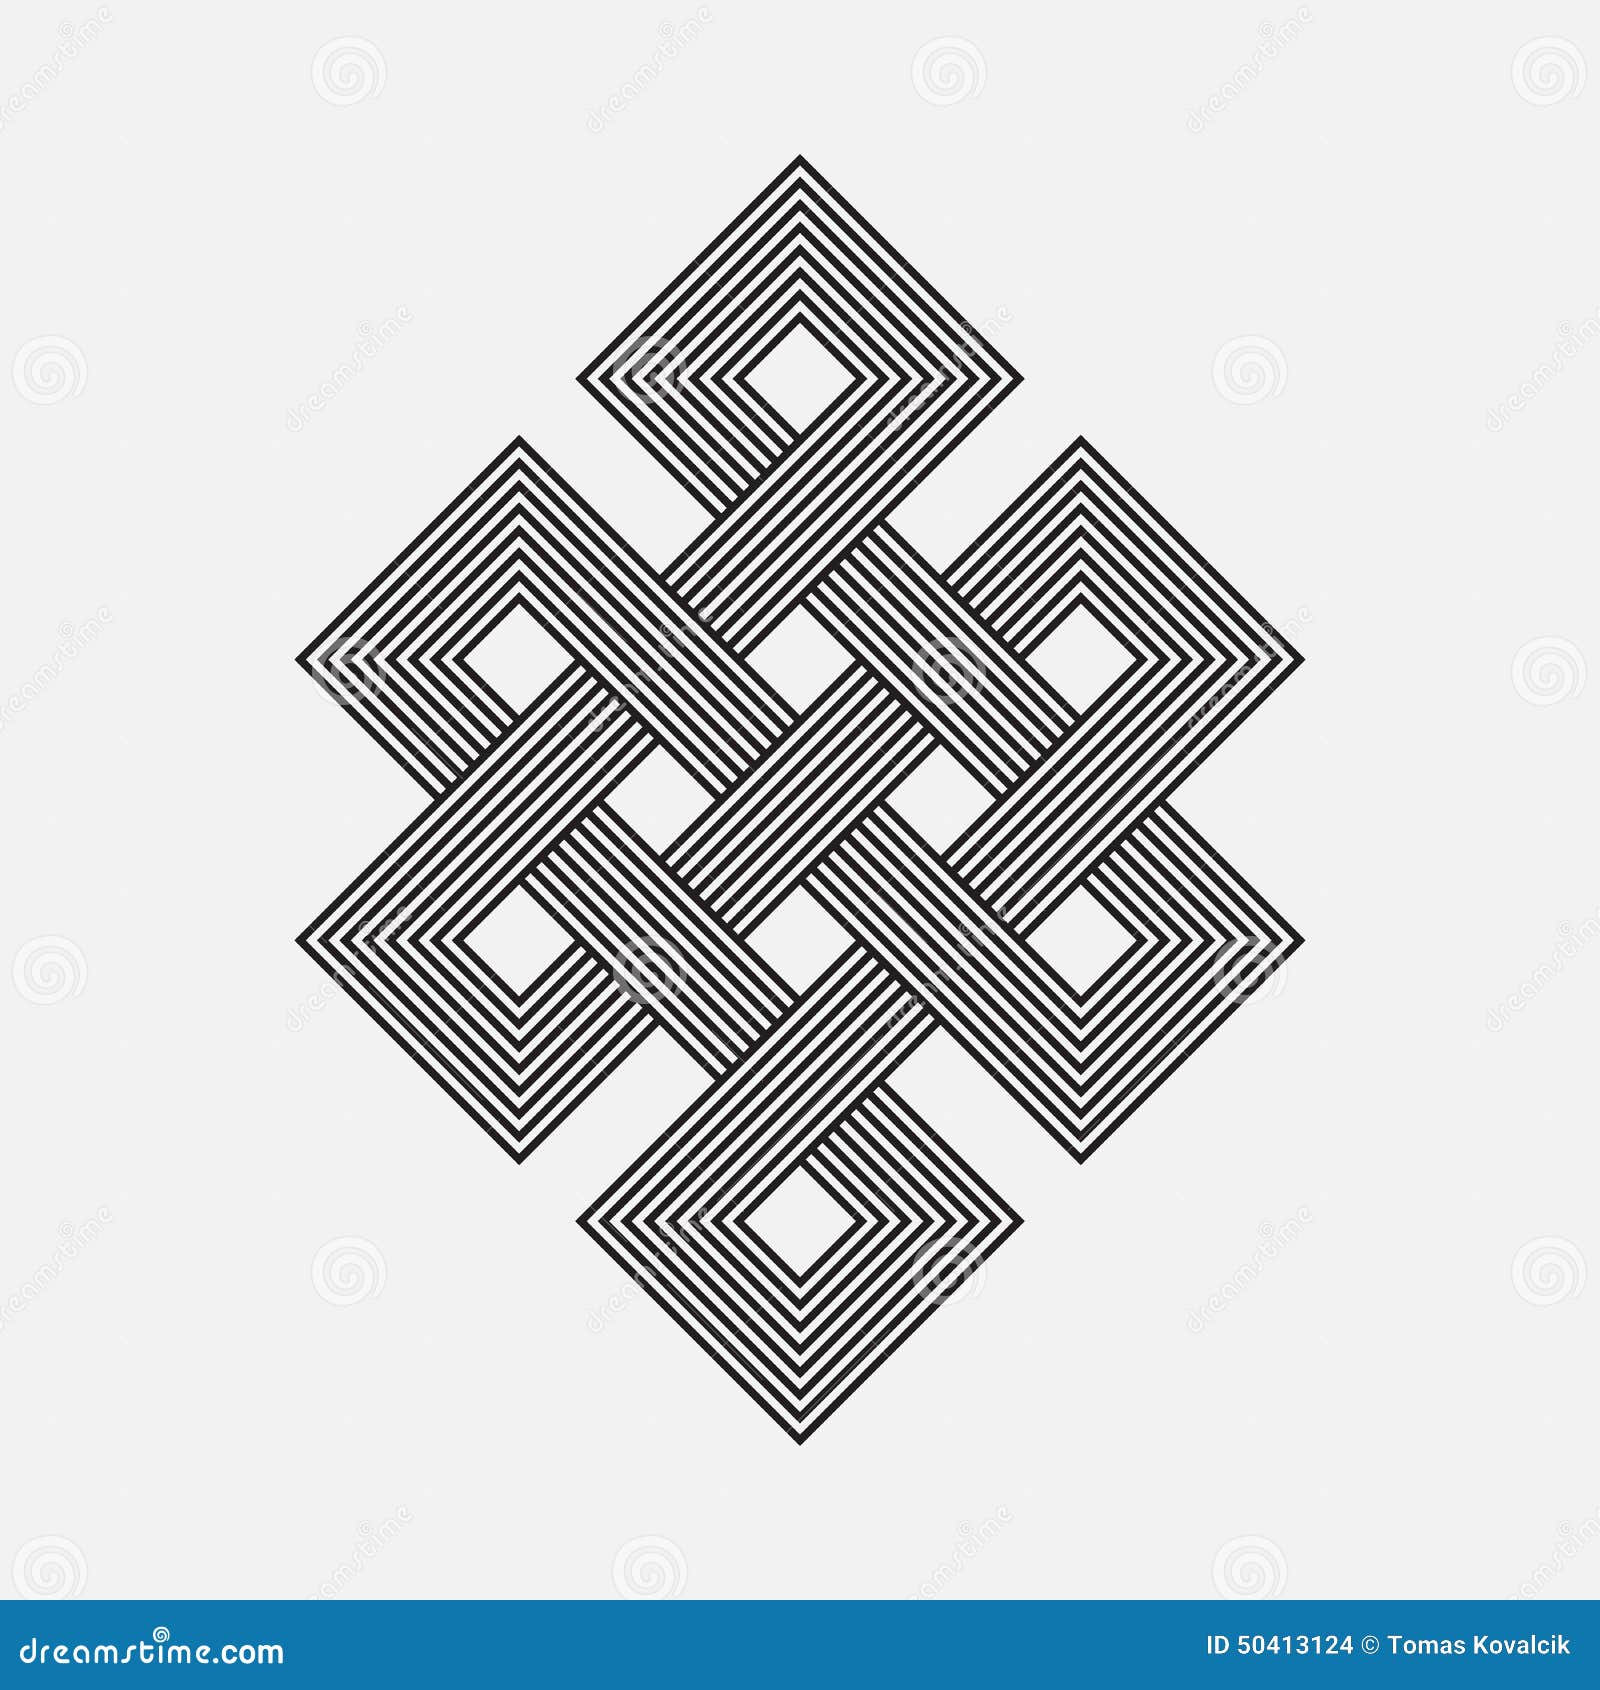 Intertwined Pattern Stock Vector - Image: 50413124